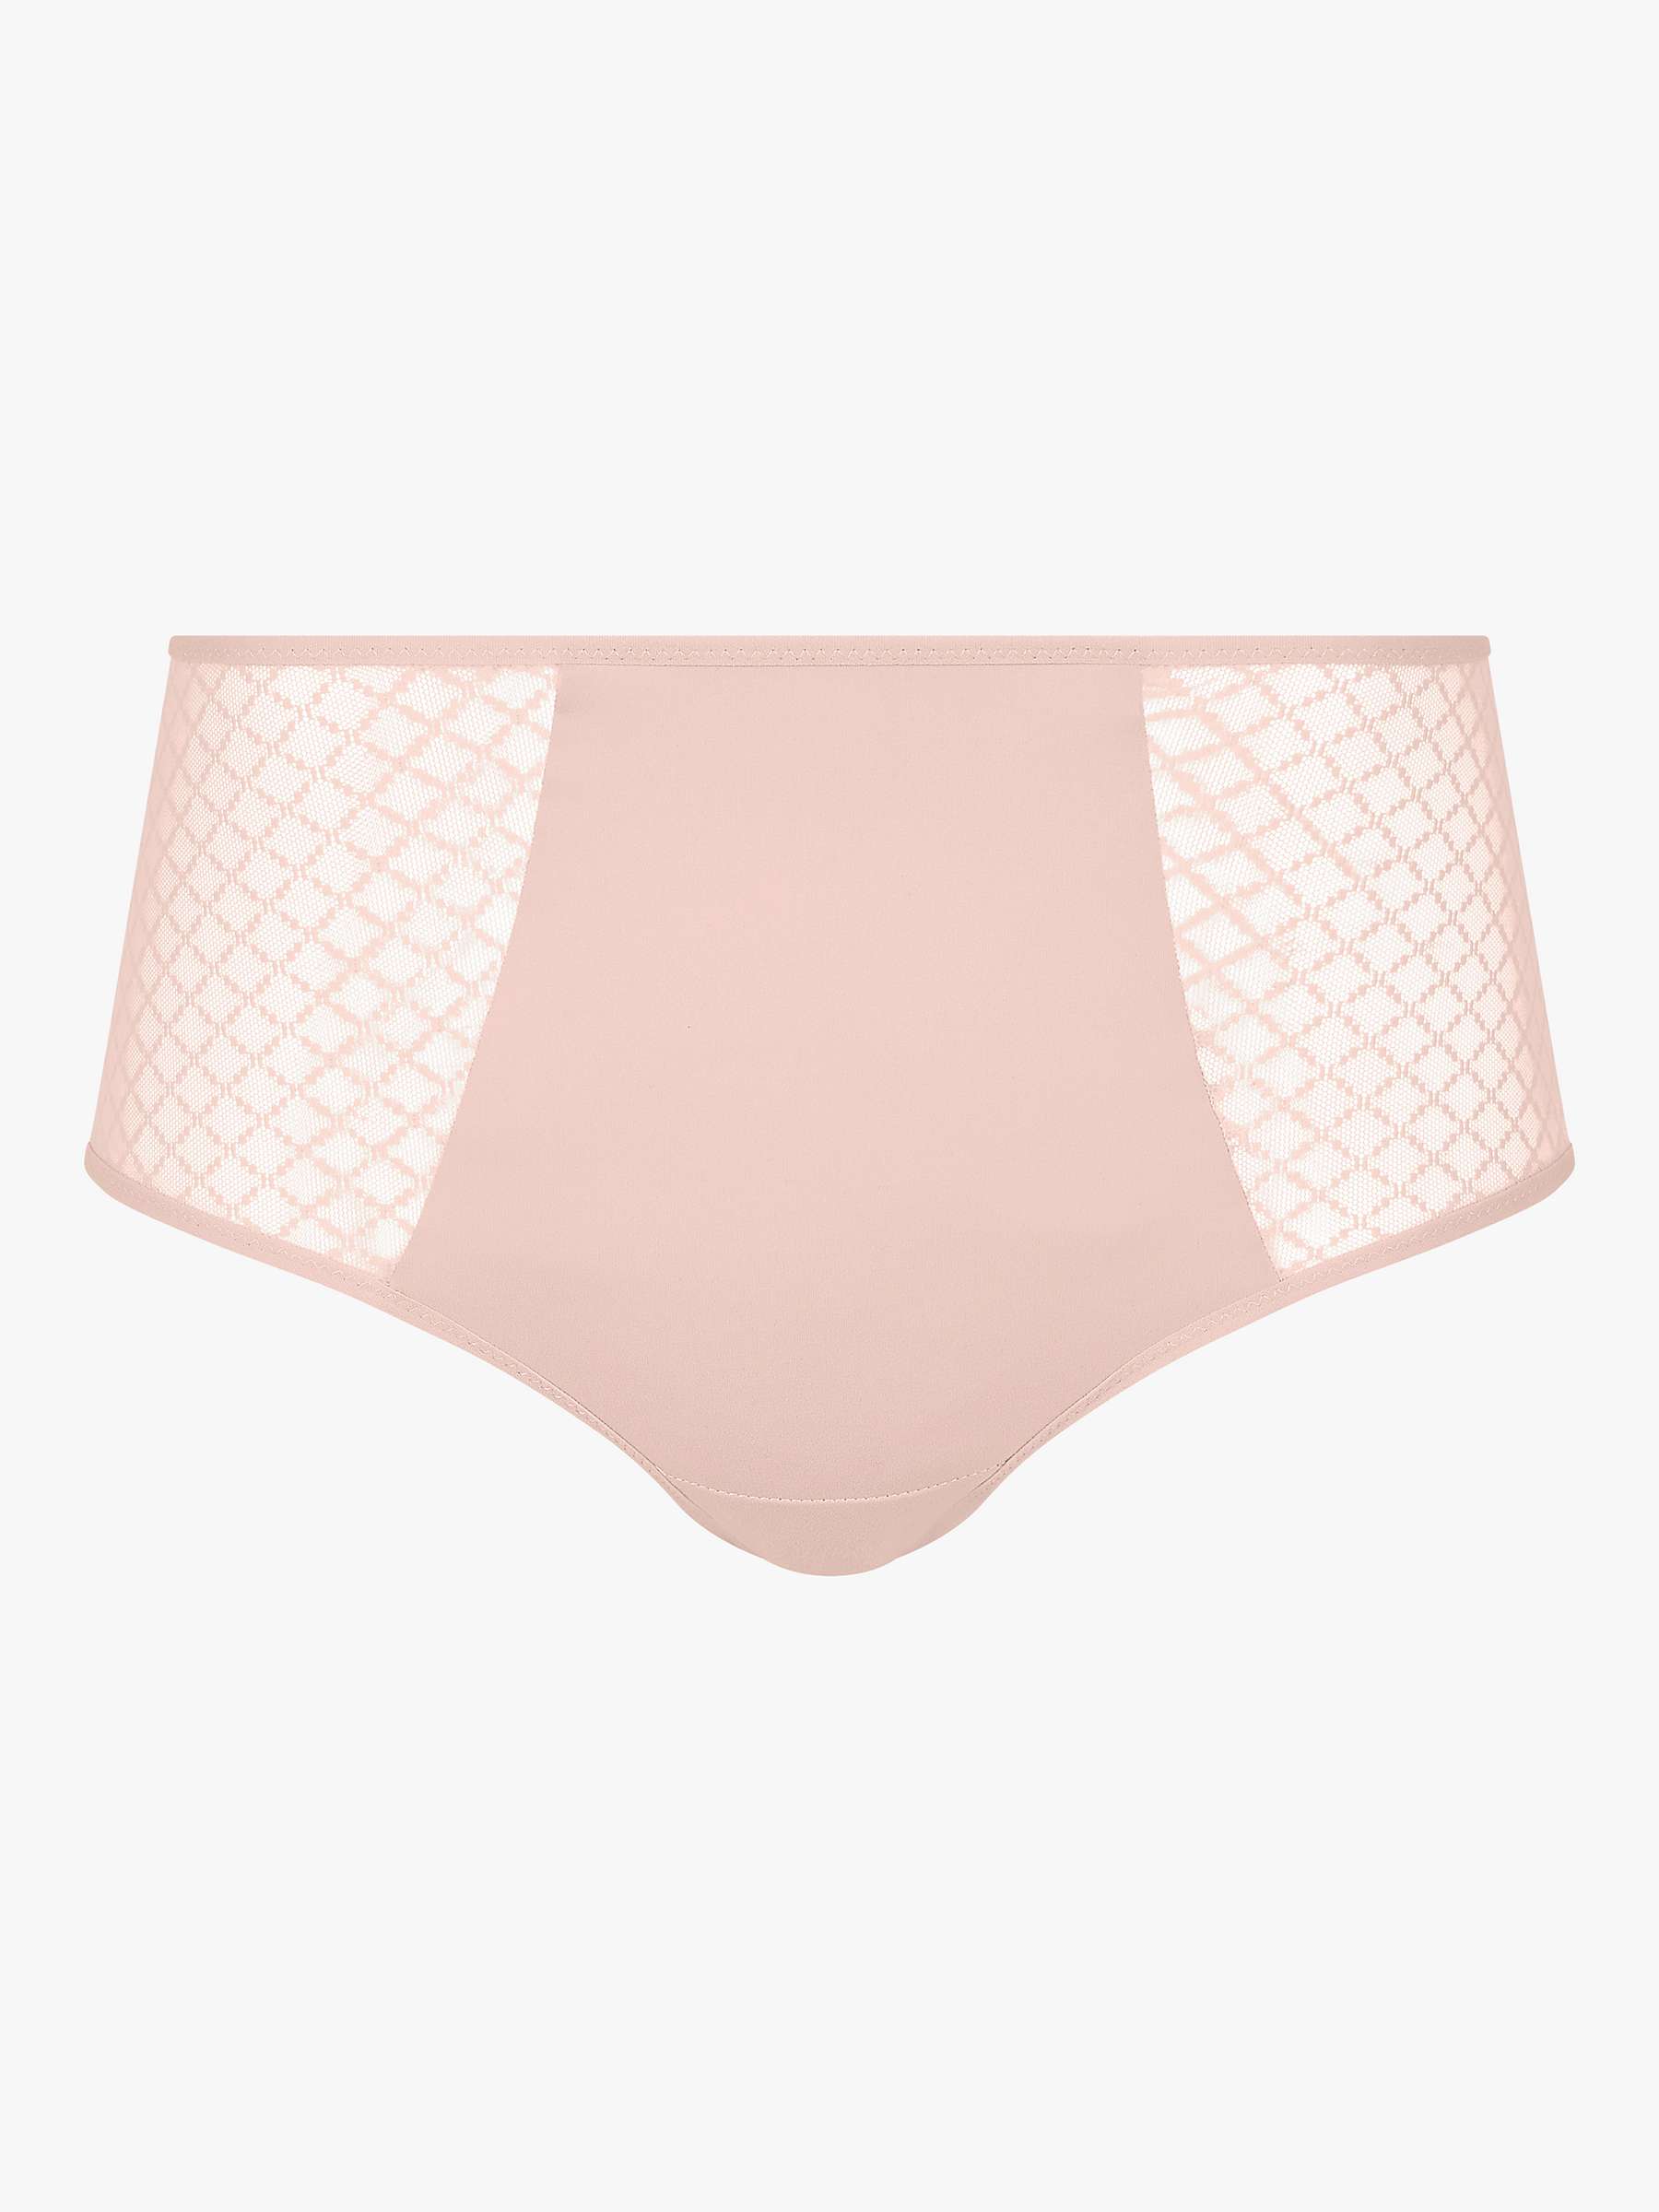 Buy Chantelle Norah Chic High Waisted Briefs Online at johnlewis.com